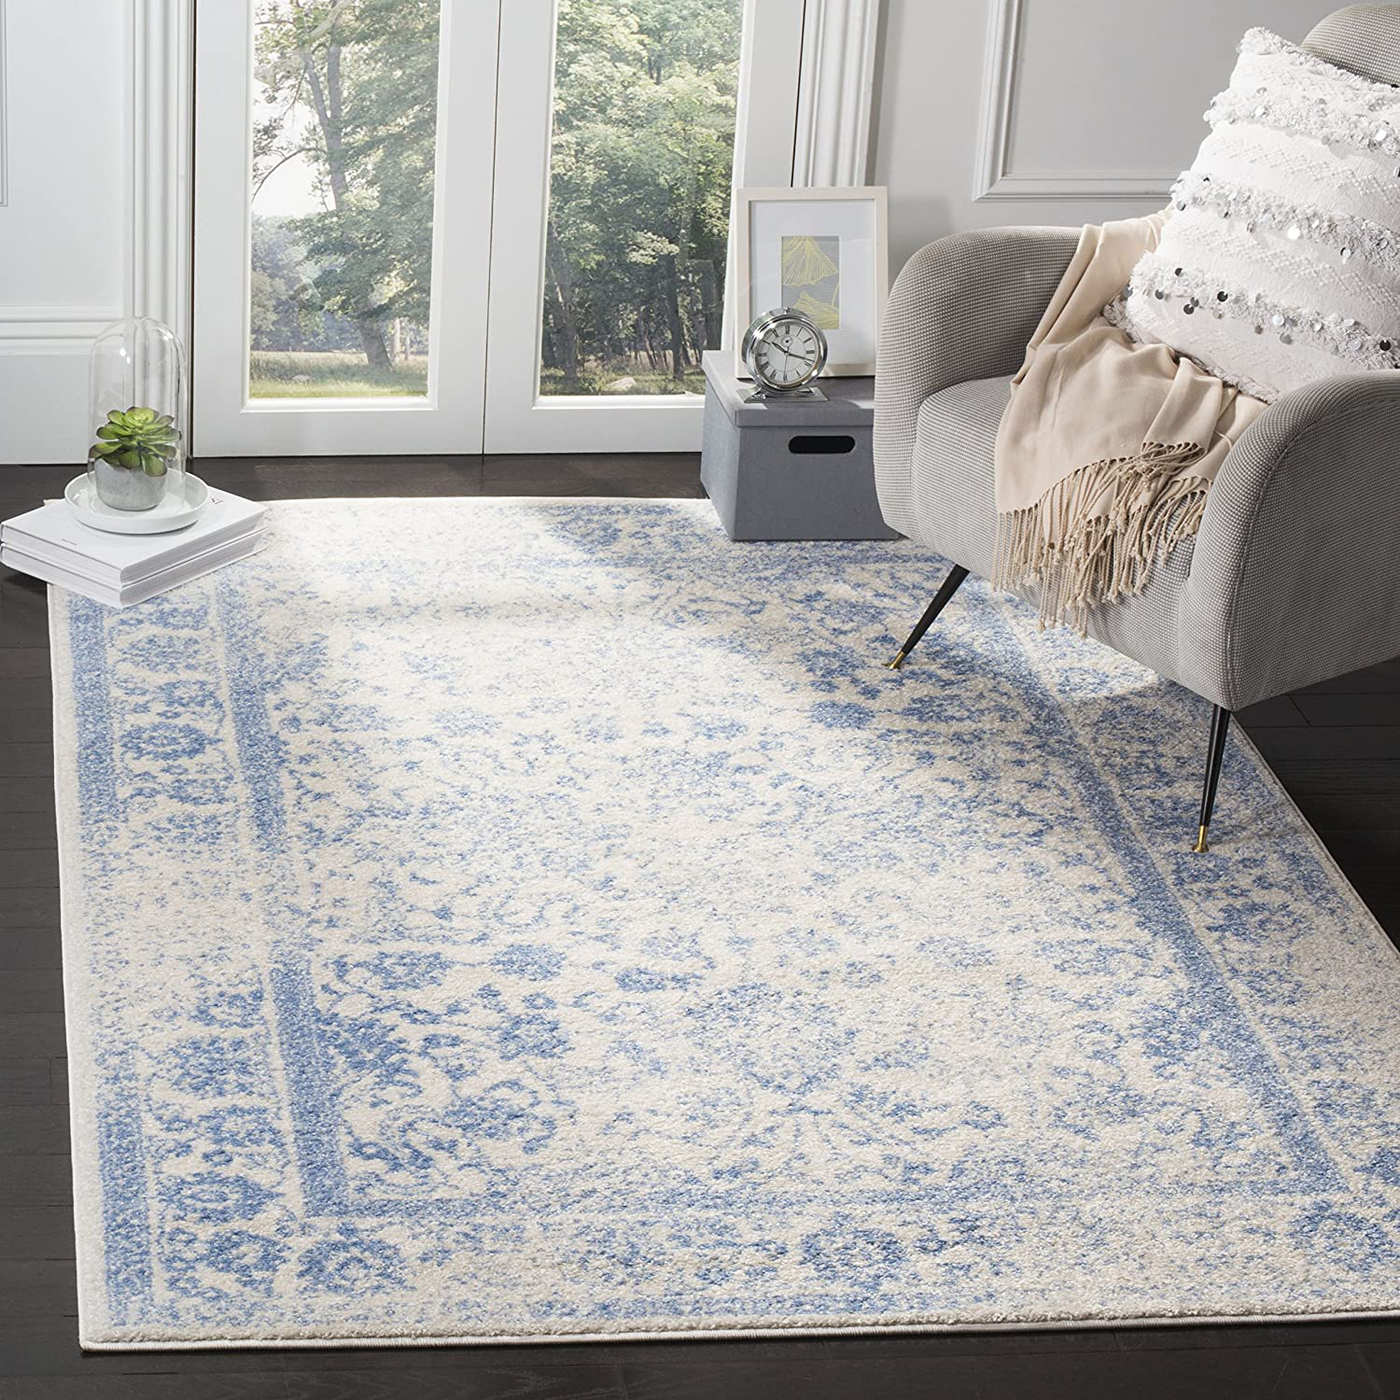 Safavieh Adirondack Collection ADR109L Oriental Distressed Non-Shedding Stain Resistant Living Room Bedroom Area Rug, 4' x 4' Square, Ivory / Light Blue